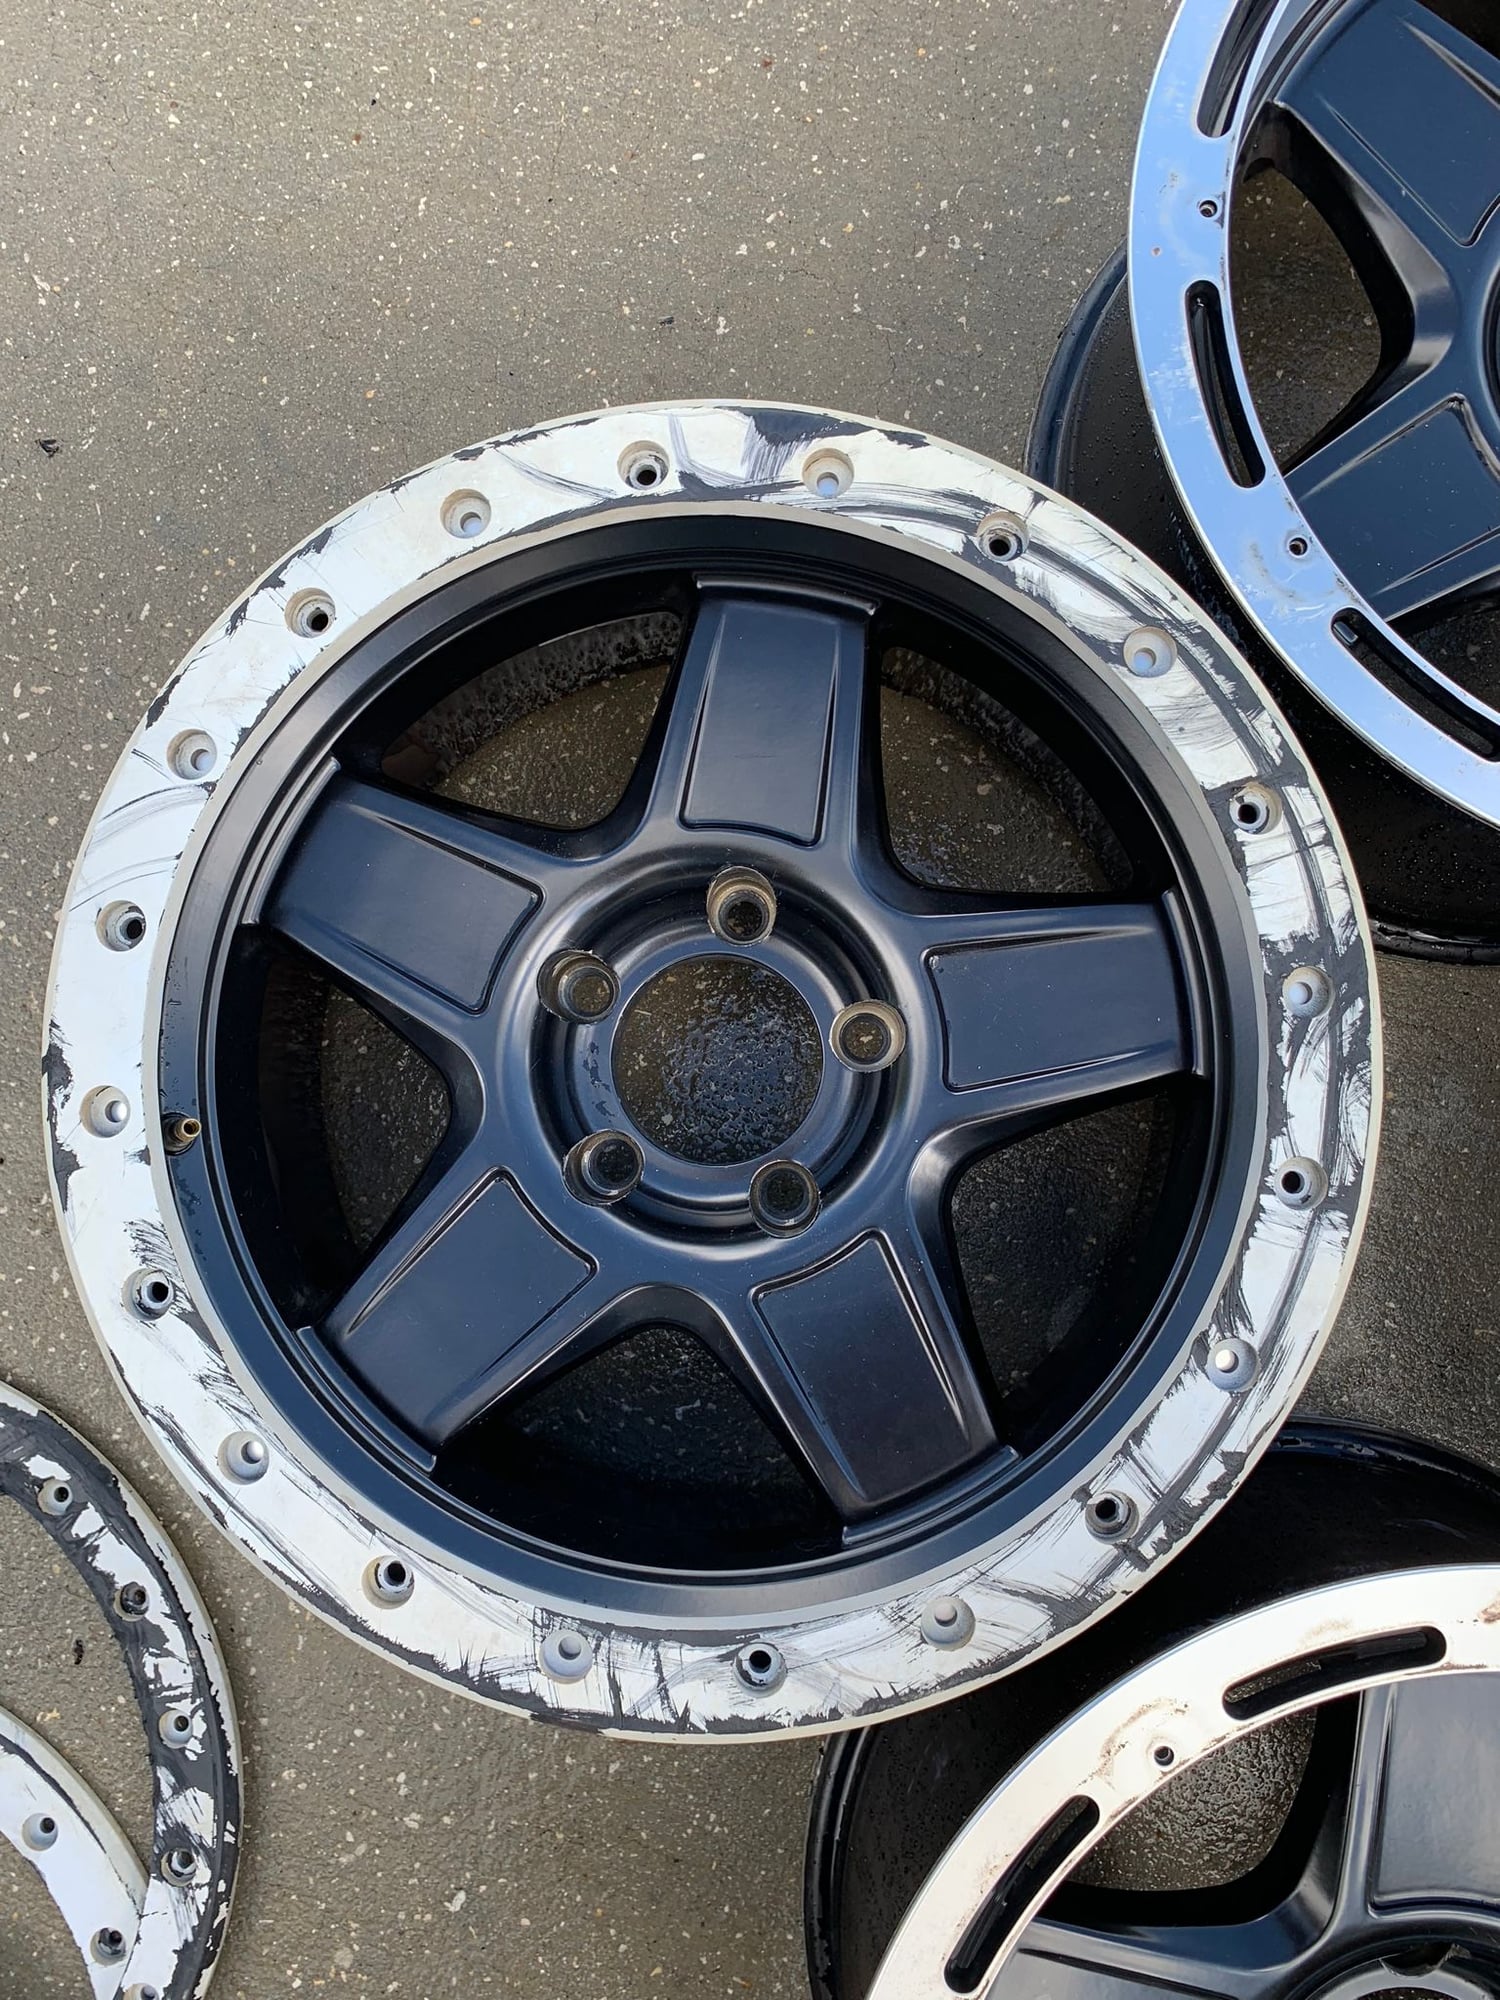 Wheels and Tires/Axles - 17" Level 8 ZX Wheels with Rock Guard - Used - 2007 to 2019 Jeep Wrangler - Debary, FL 32713, United States